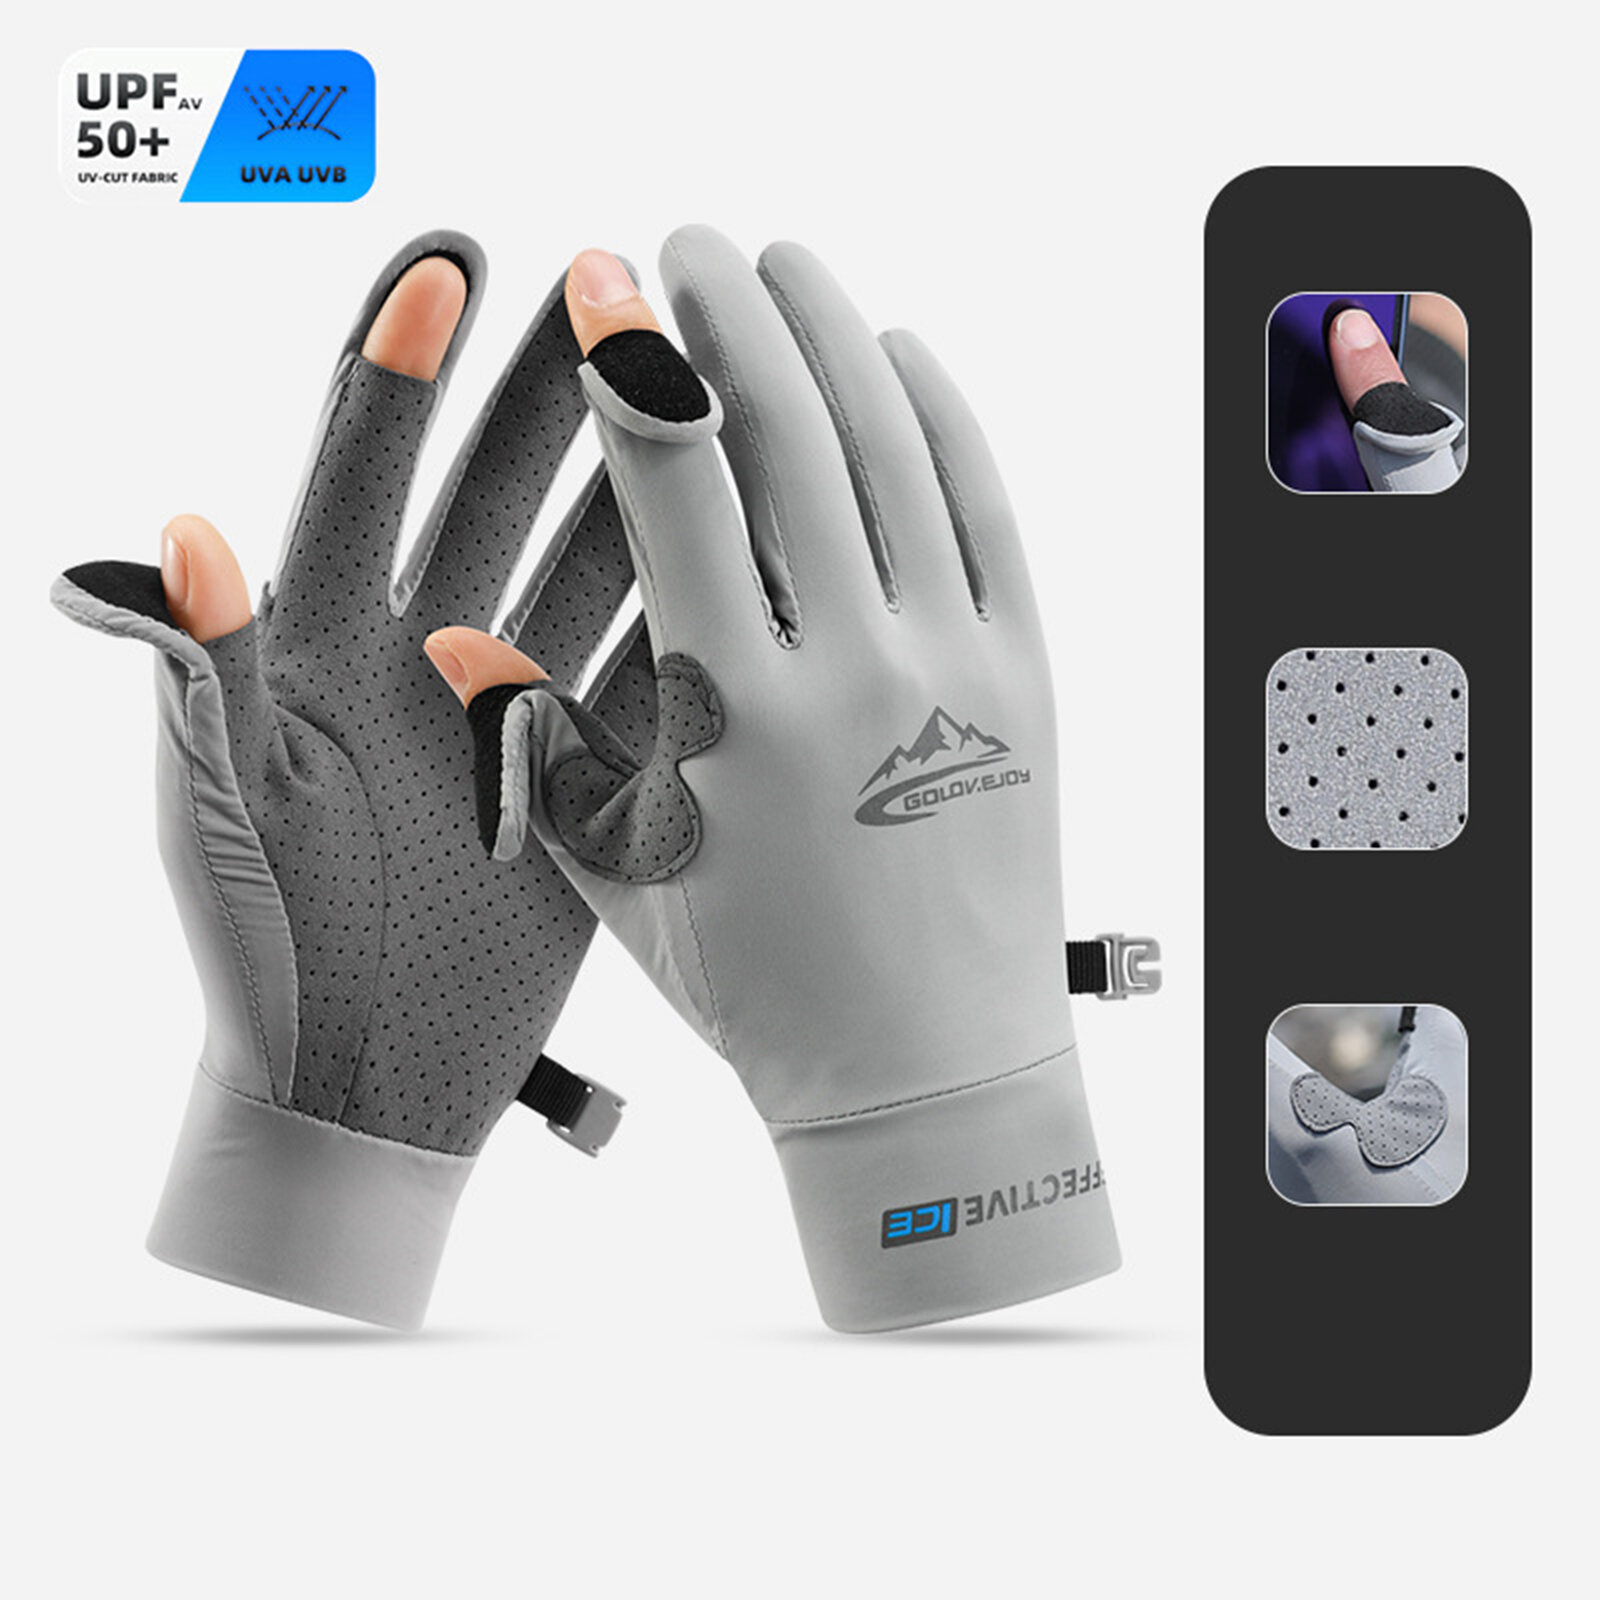 Jassy Neutral Ice Silk Screen Wear-resistant Non-slip Outdoor Riding Fishing Sunscreen Gloves